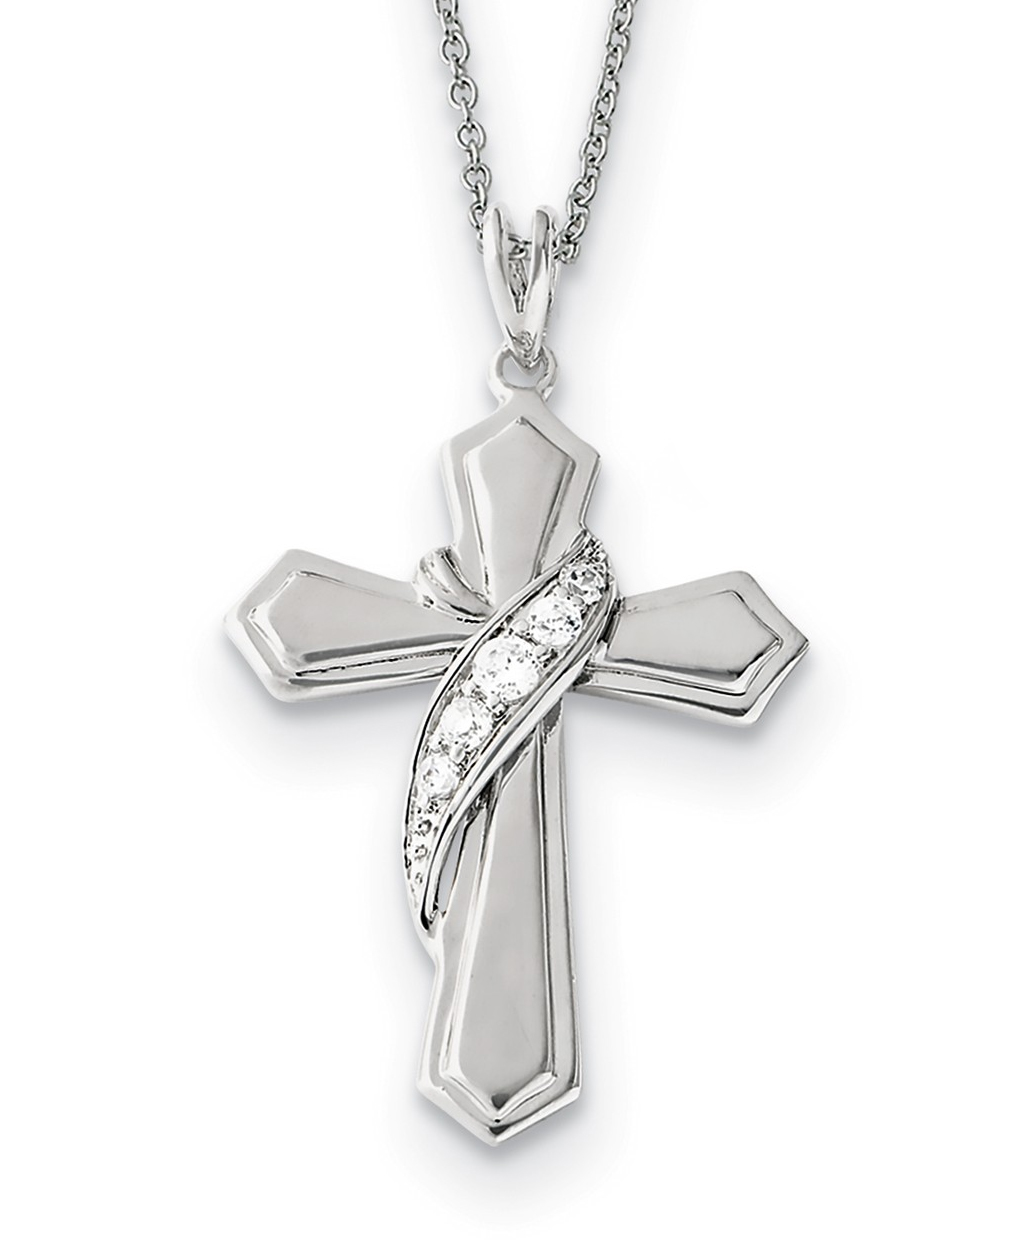  'My Journey of Hope' CZ Cross Pendant Necklace, Rhodium-Plated Sterling Silver, 18